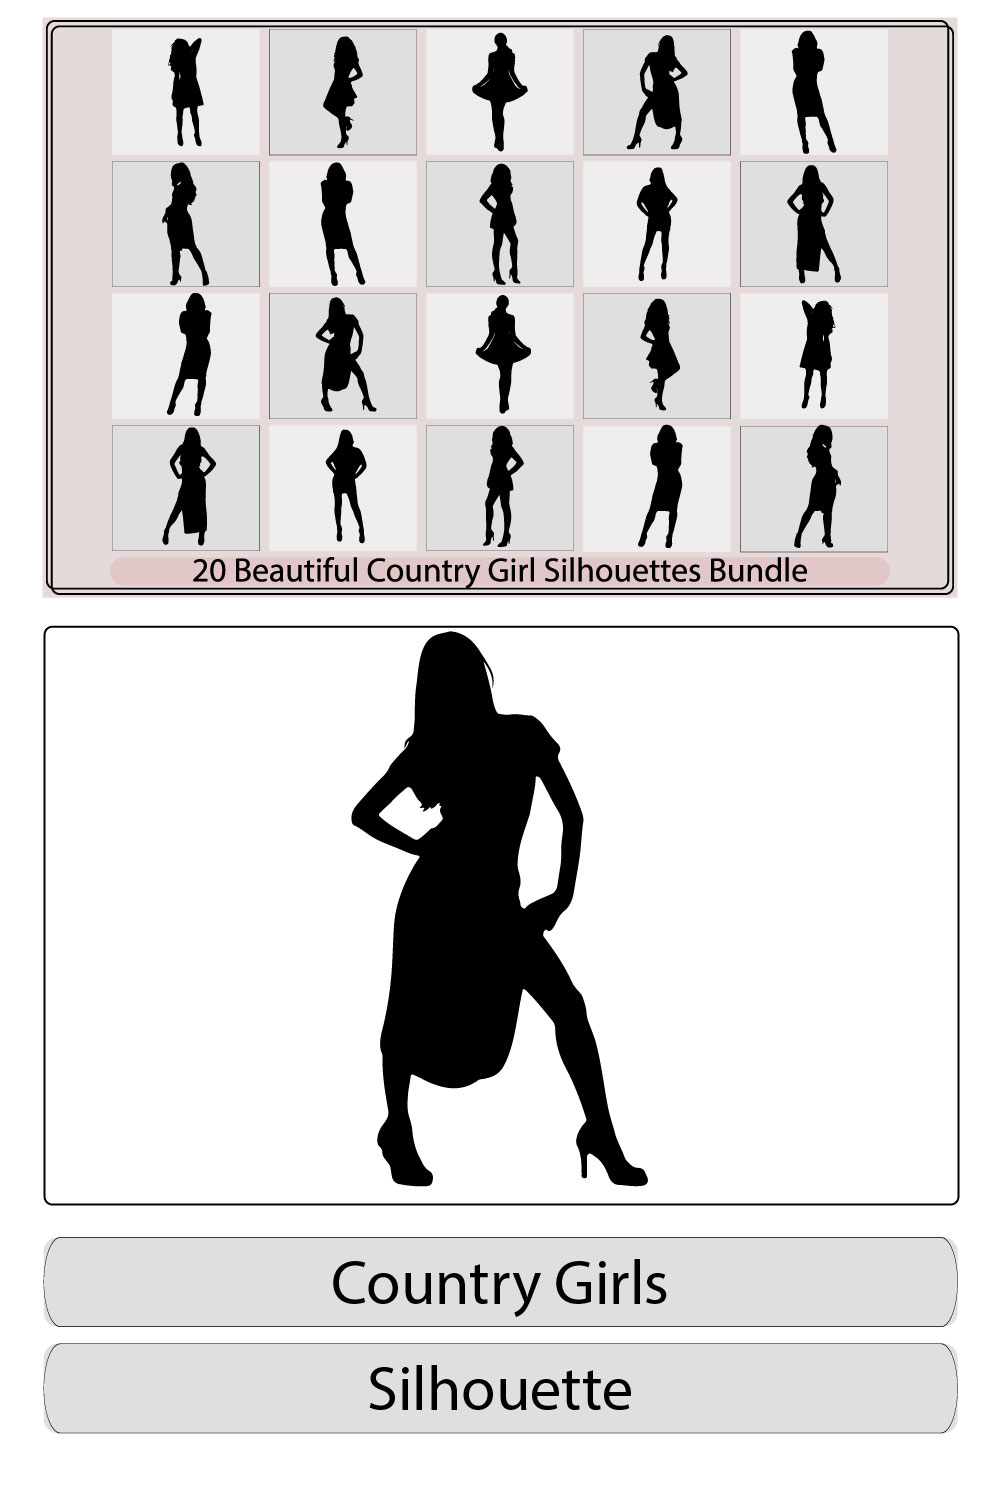 Silhouette Beautiful Country girl vector,country girl illustration, country girl silhouette bundle set pinterest preview image.